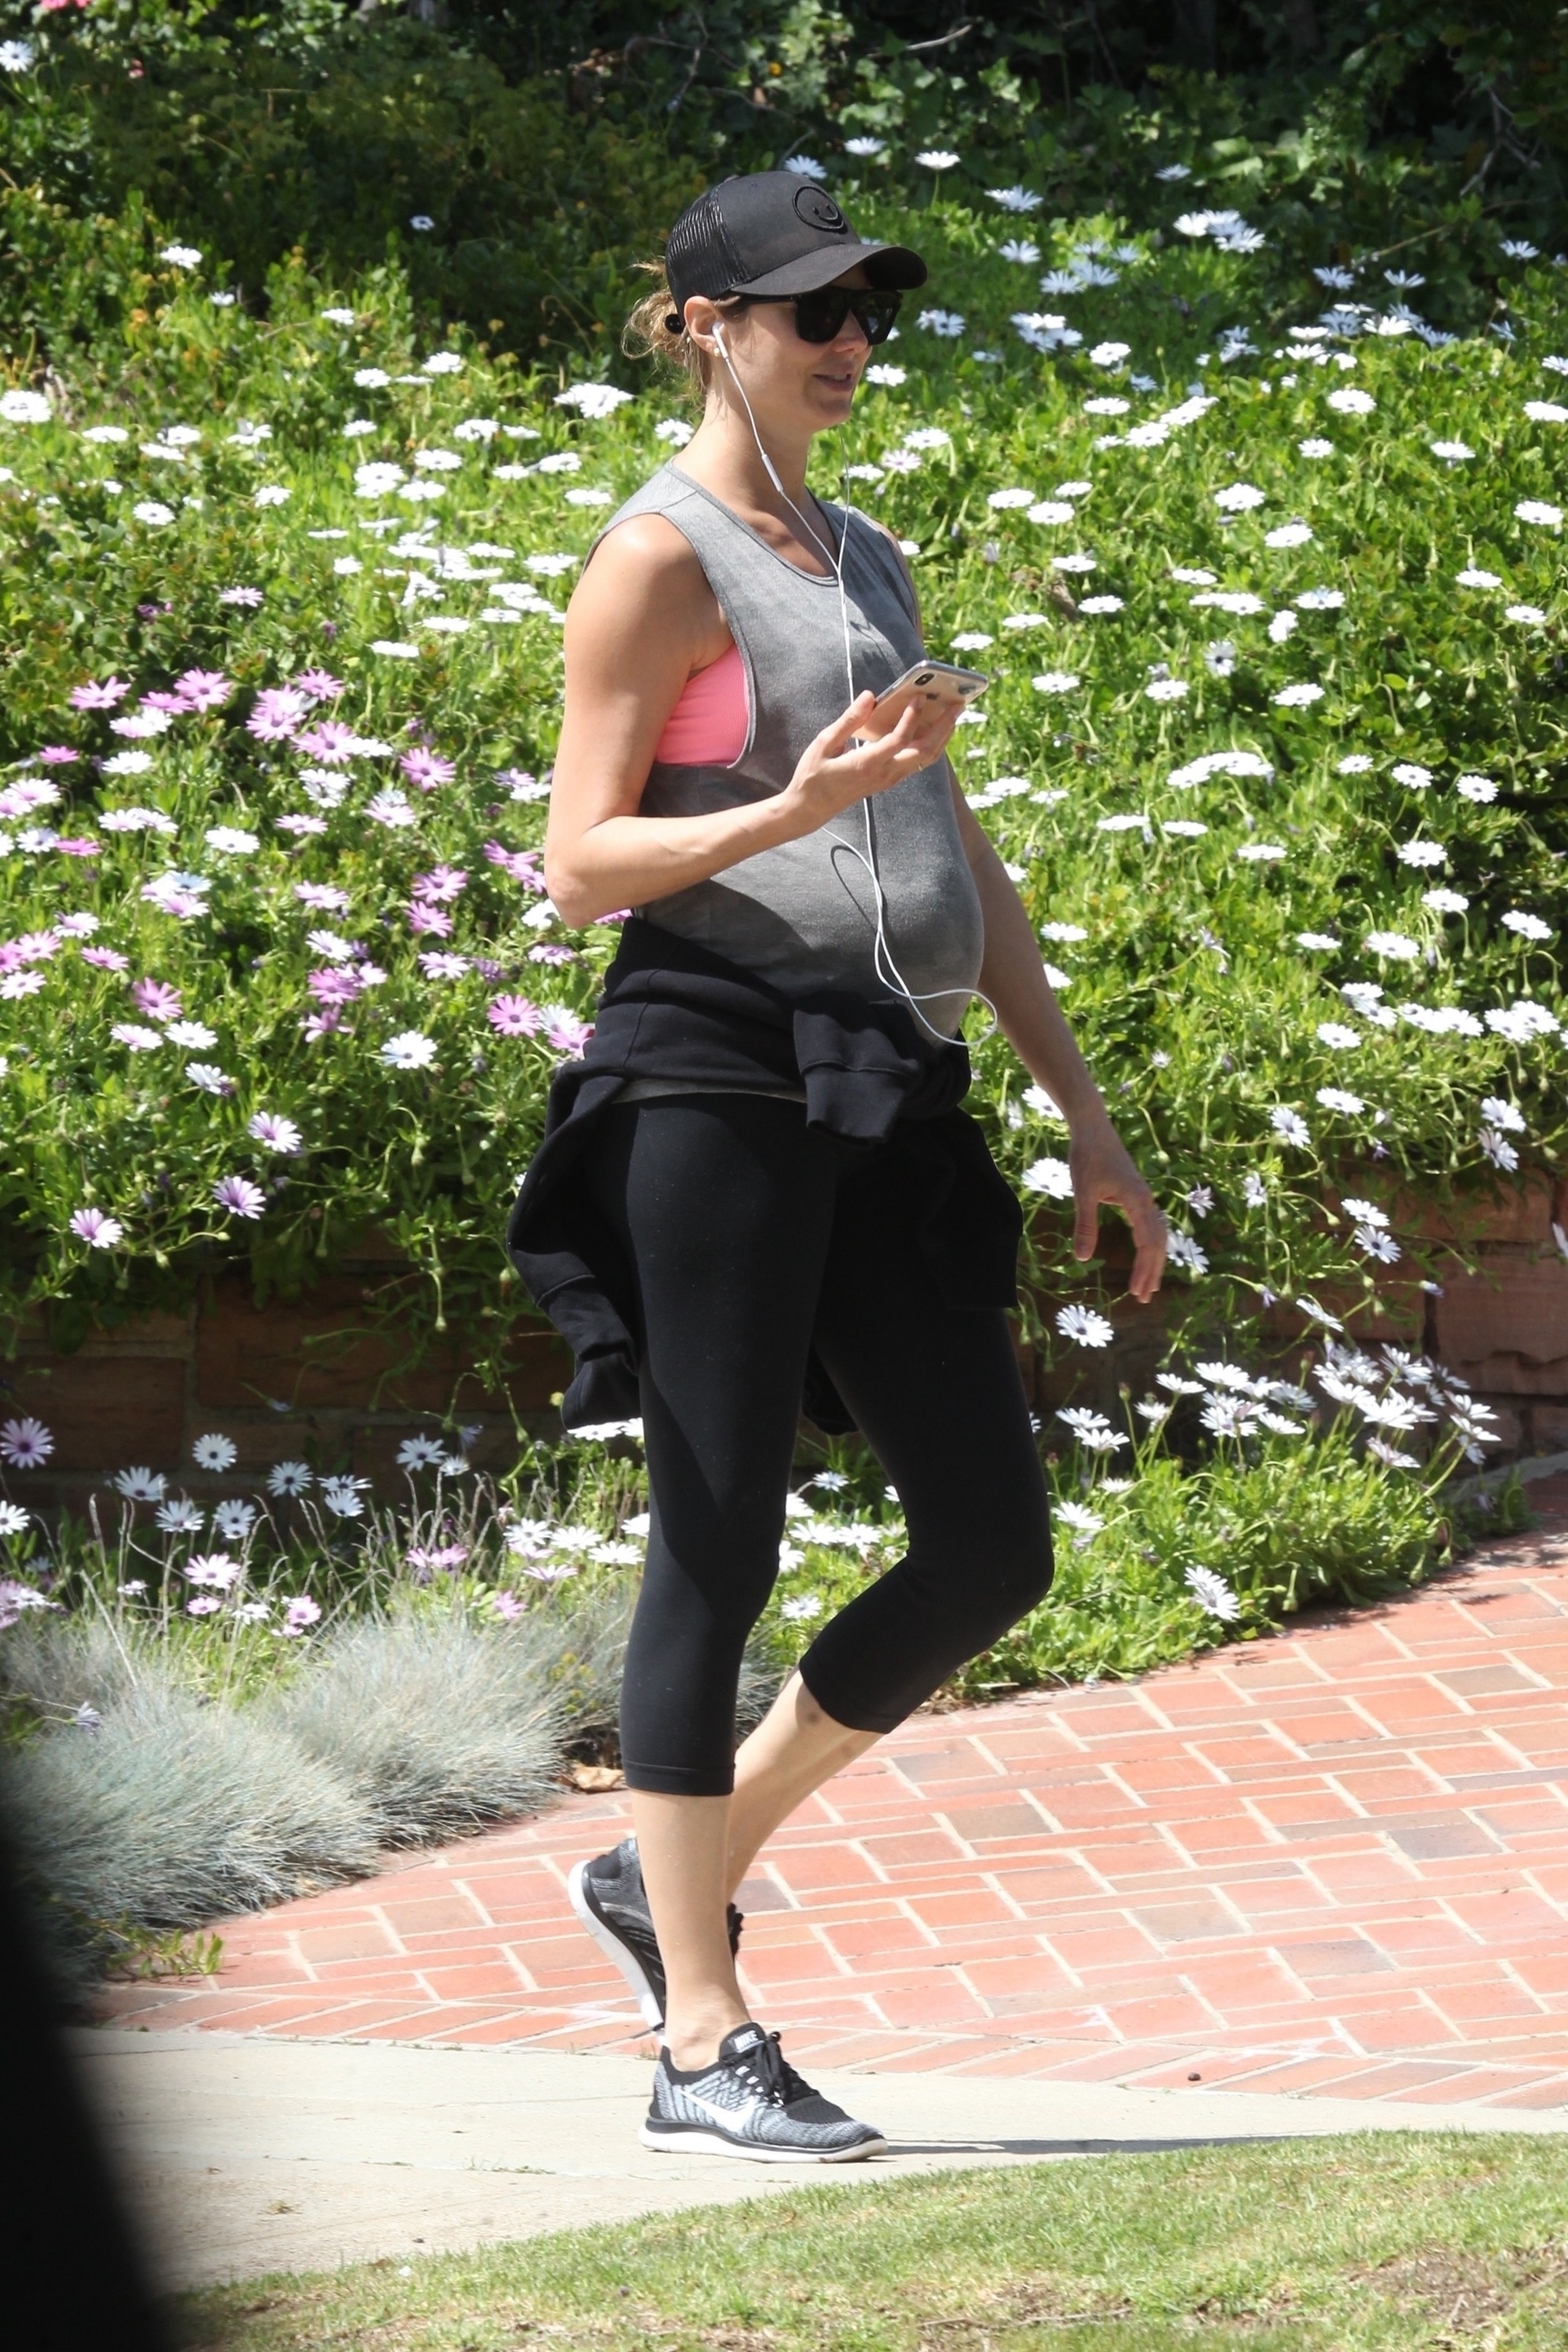 Stacy Keibler â€“ Baby Bump as She Steps out for a walk in Beverly Hills